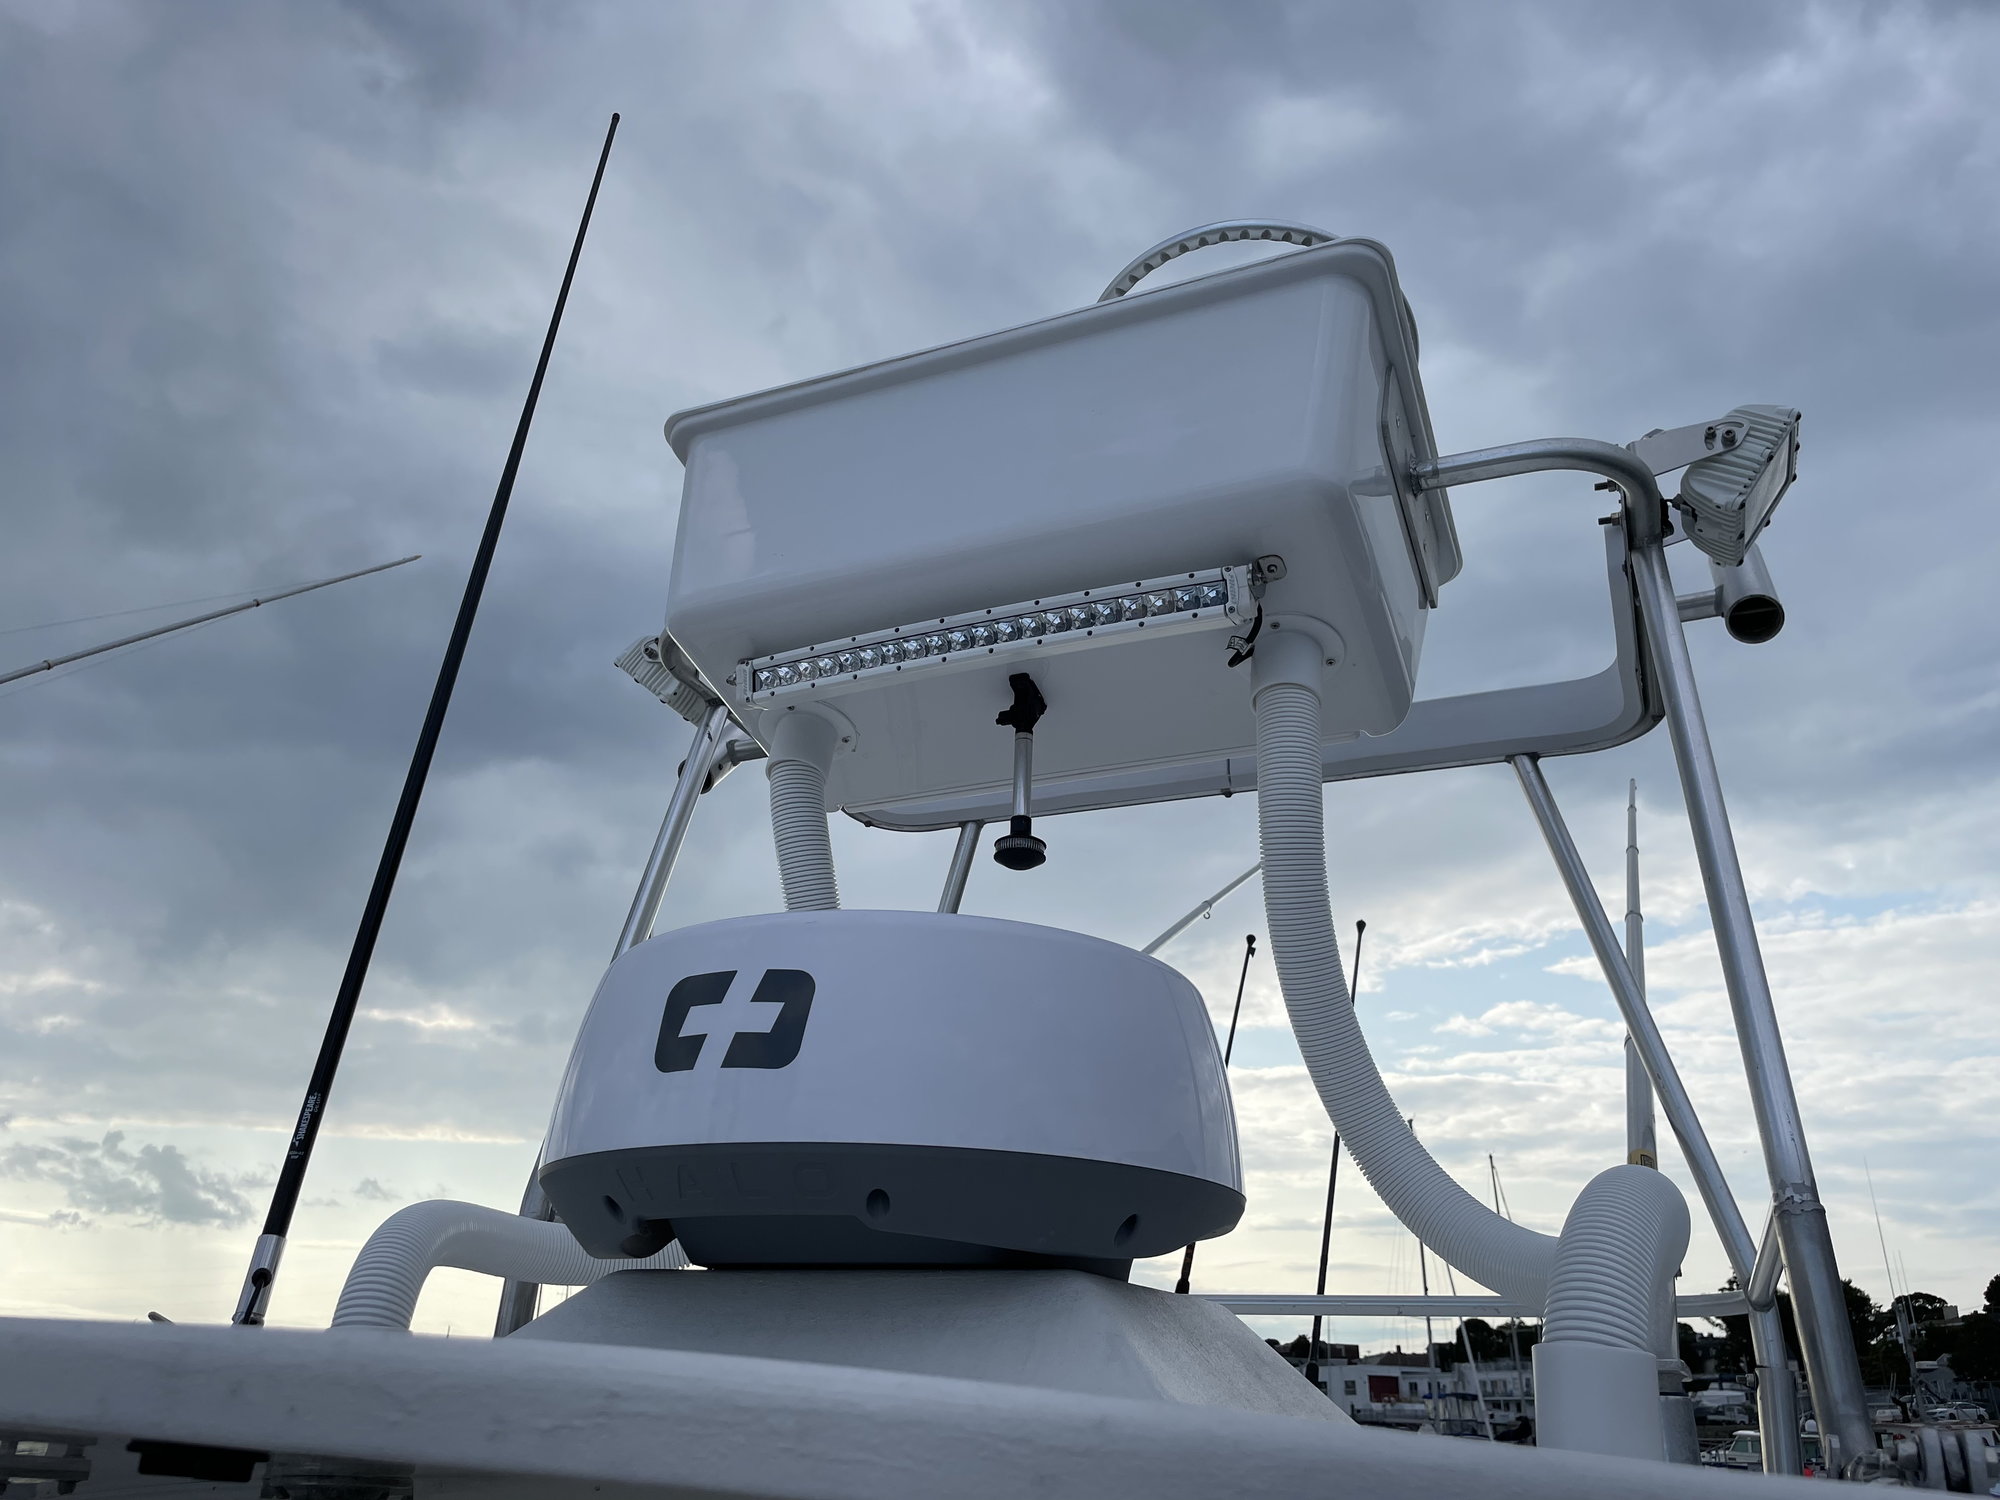 Regulator 2000 26fs - The Hull Truth - Boating and Fishing Forum